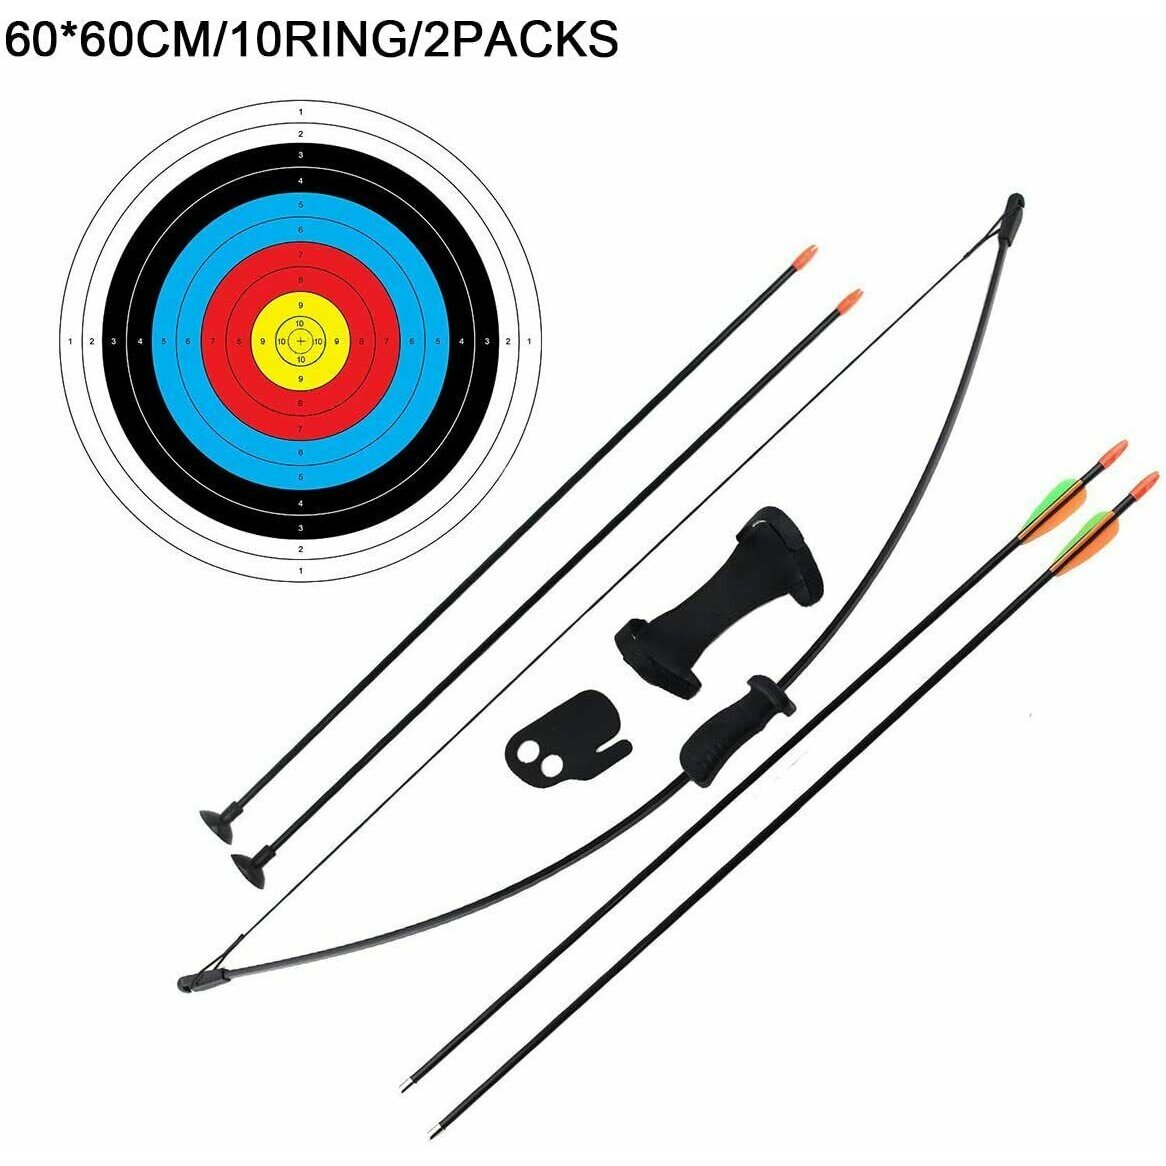 Outdoor Youth Recurve Bow and Arrow Set Children Junior Archery Game